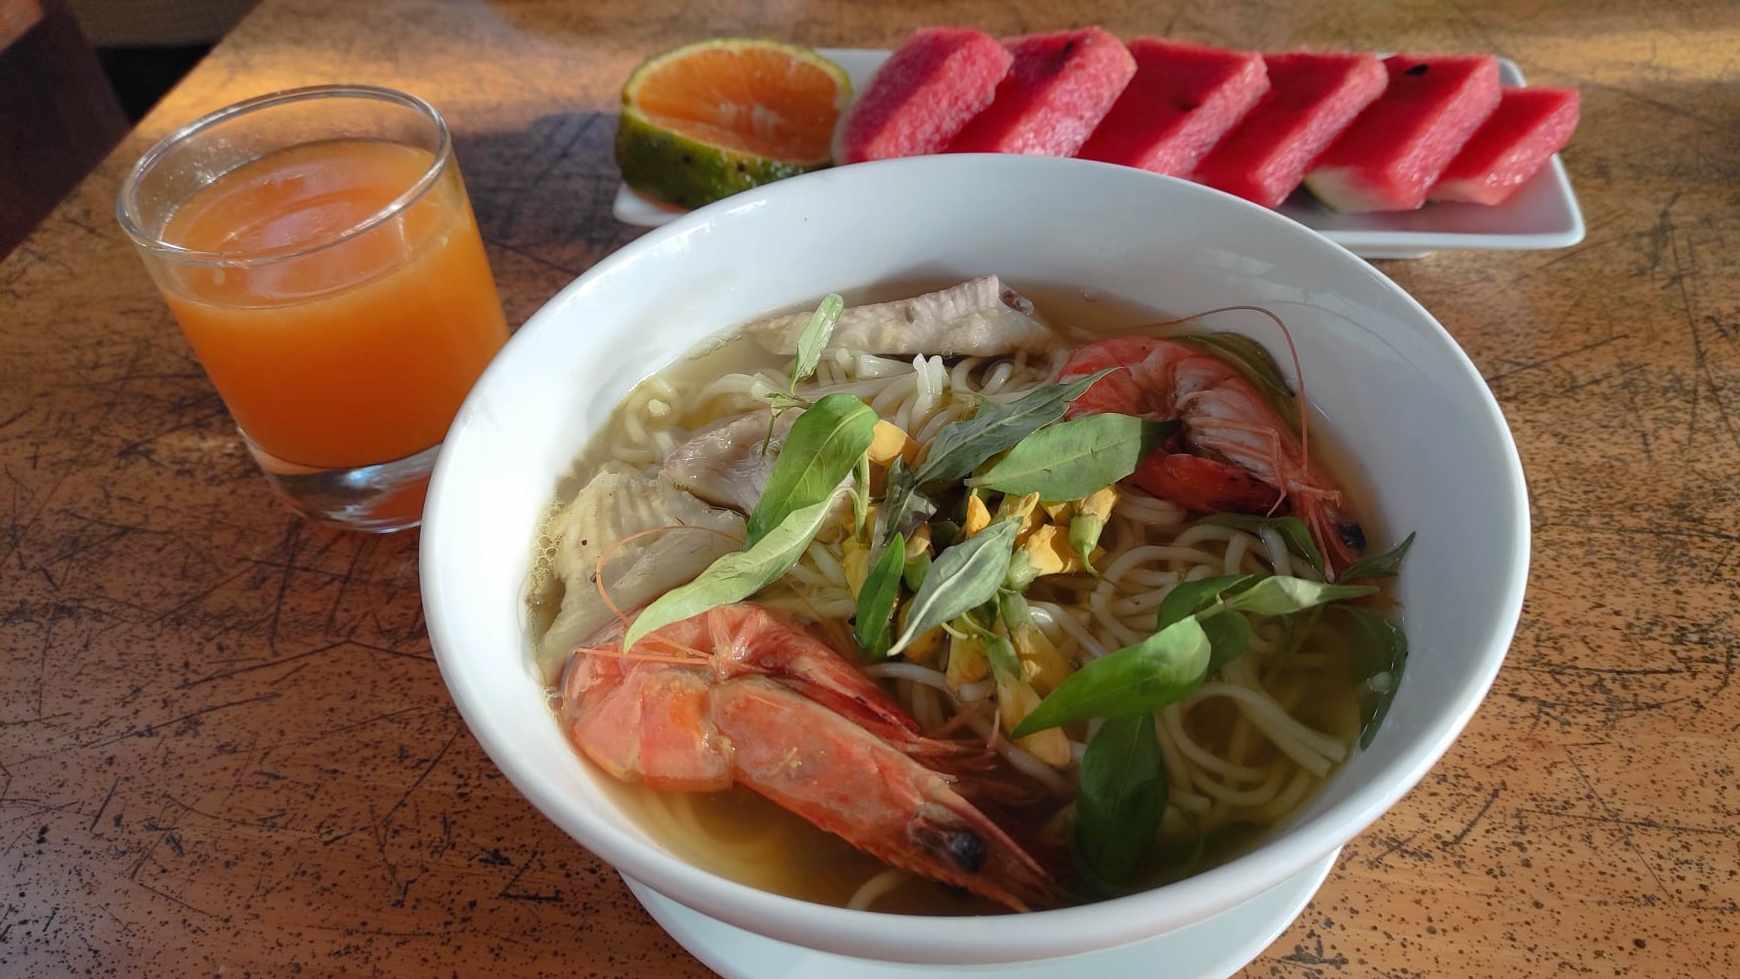 A bowl of ‘bún nước lèo’ (Vietnamese noodle soup with seafood) that Sally Bell, a tourist from Malta, ate during her visit to Can Tho City in the Mekong Delta, Vietnam in February 2023. Photo: Sally Bell